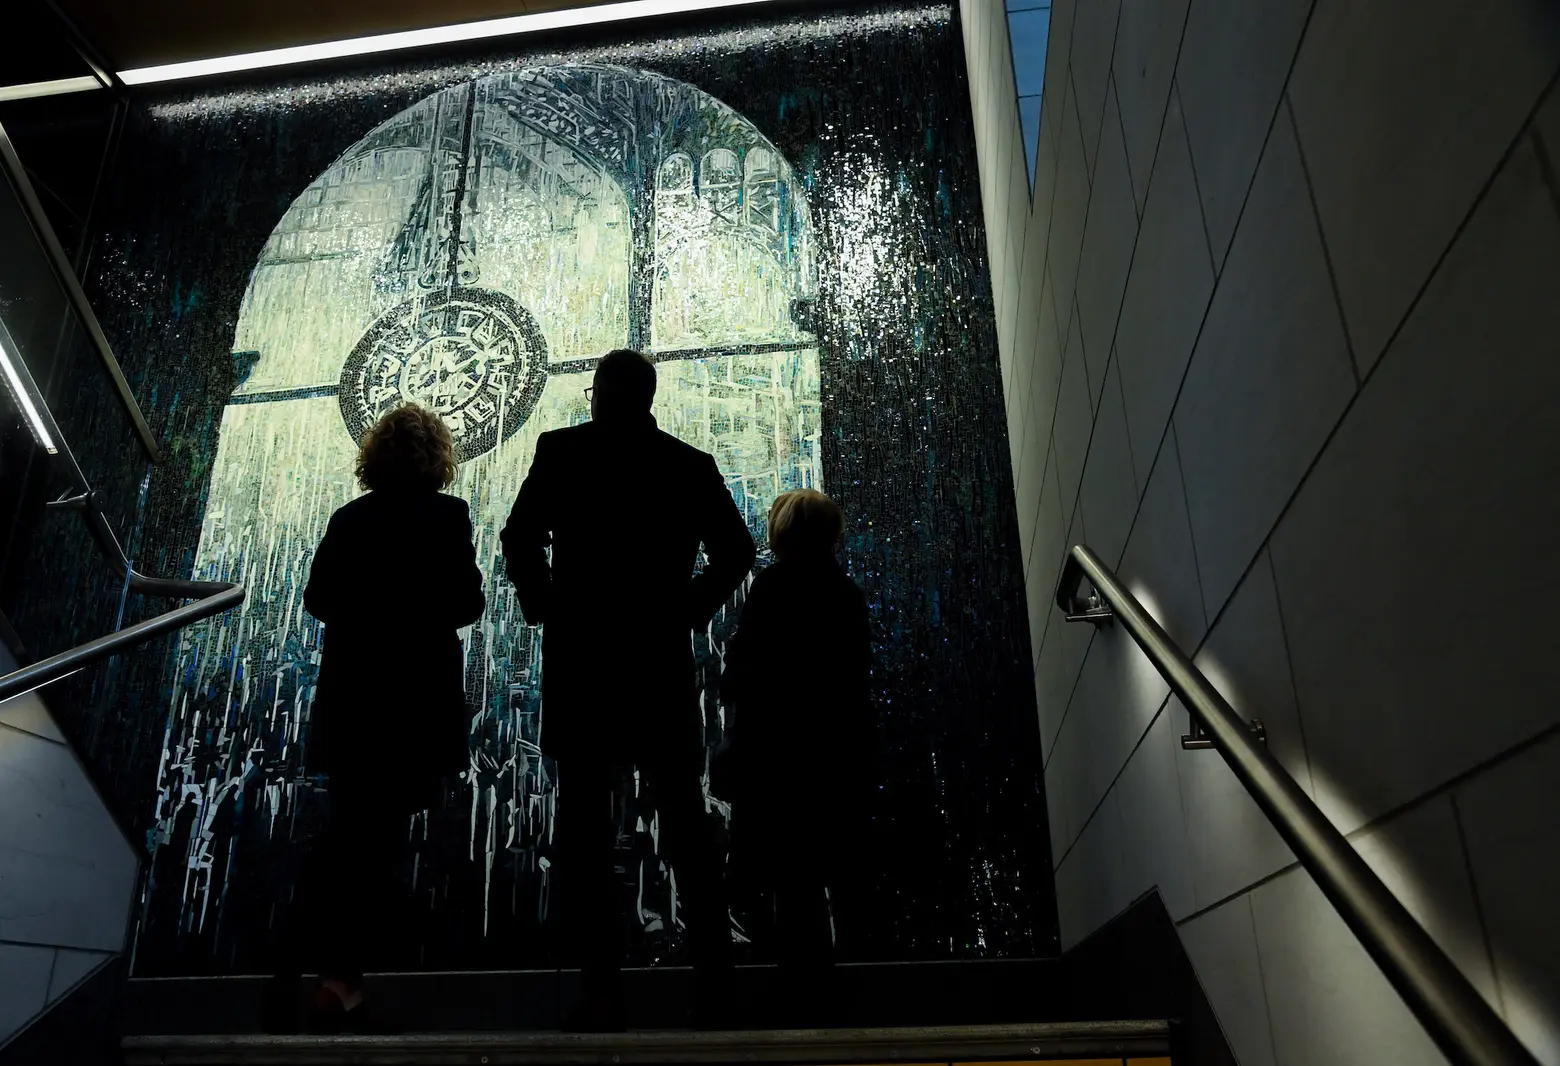 New 34th Street station entrance features mosaic depicting clock from old Penn Station